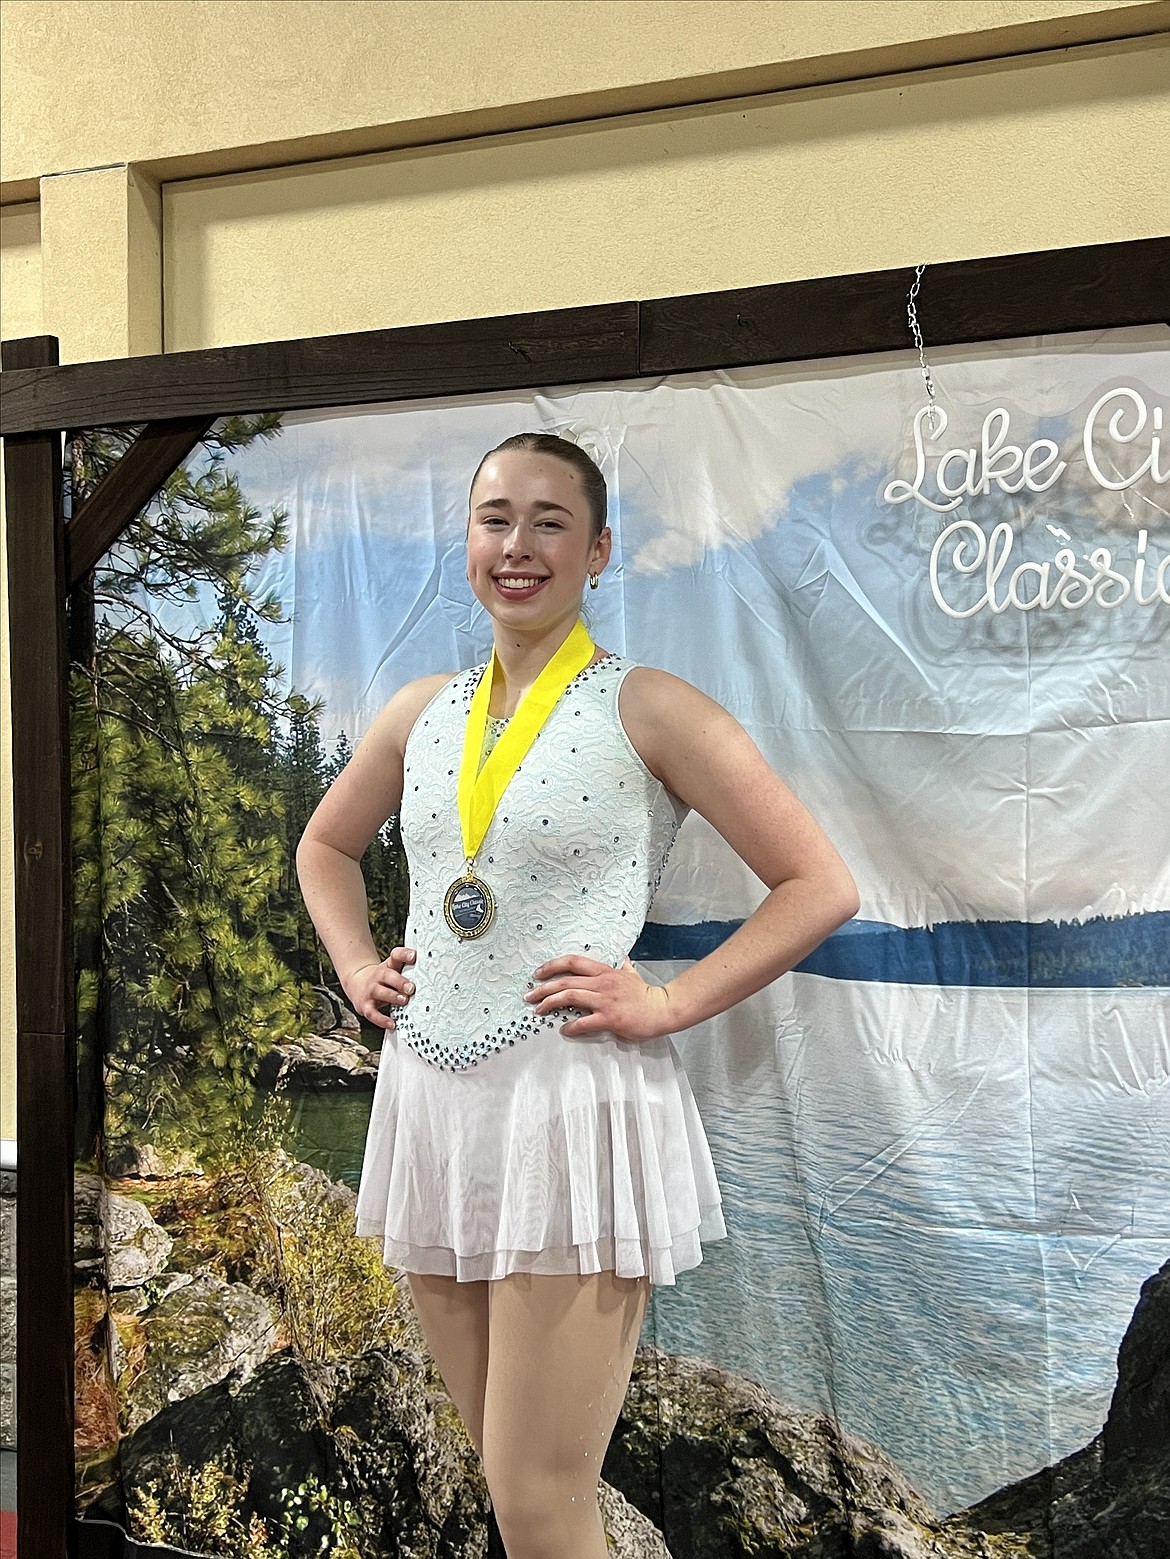 Courtesy photo 
Lily Joubert, part of the Lake City Figure Skating program of the Spokane Figure Skating Club, which hosted the Lake City Classic on May 17-19 at the Frontier Ice Arena in Coeur d'Alene.